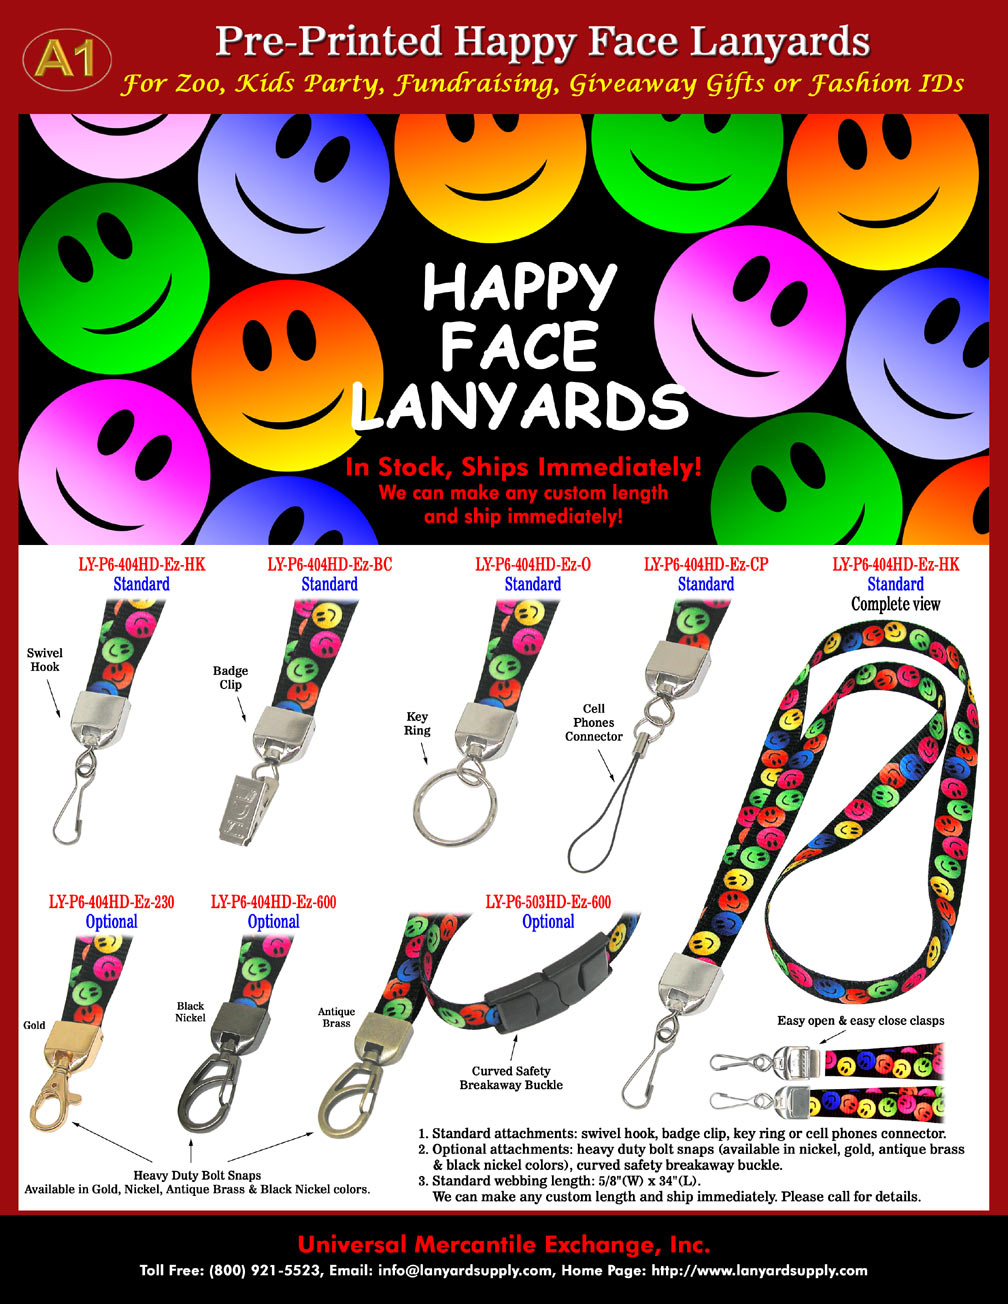 Happy Face lanyards are pre-printed lanyards with attractive rosette coat patterns. Good For ID Name Badge Holders, Key Holders, Zoo, Kids Party, Fundraising, Promotional Giveaway or Gifts.